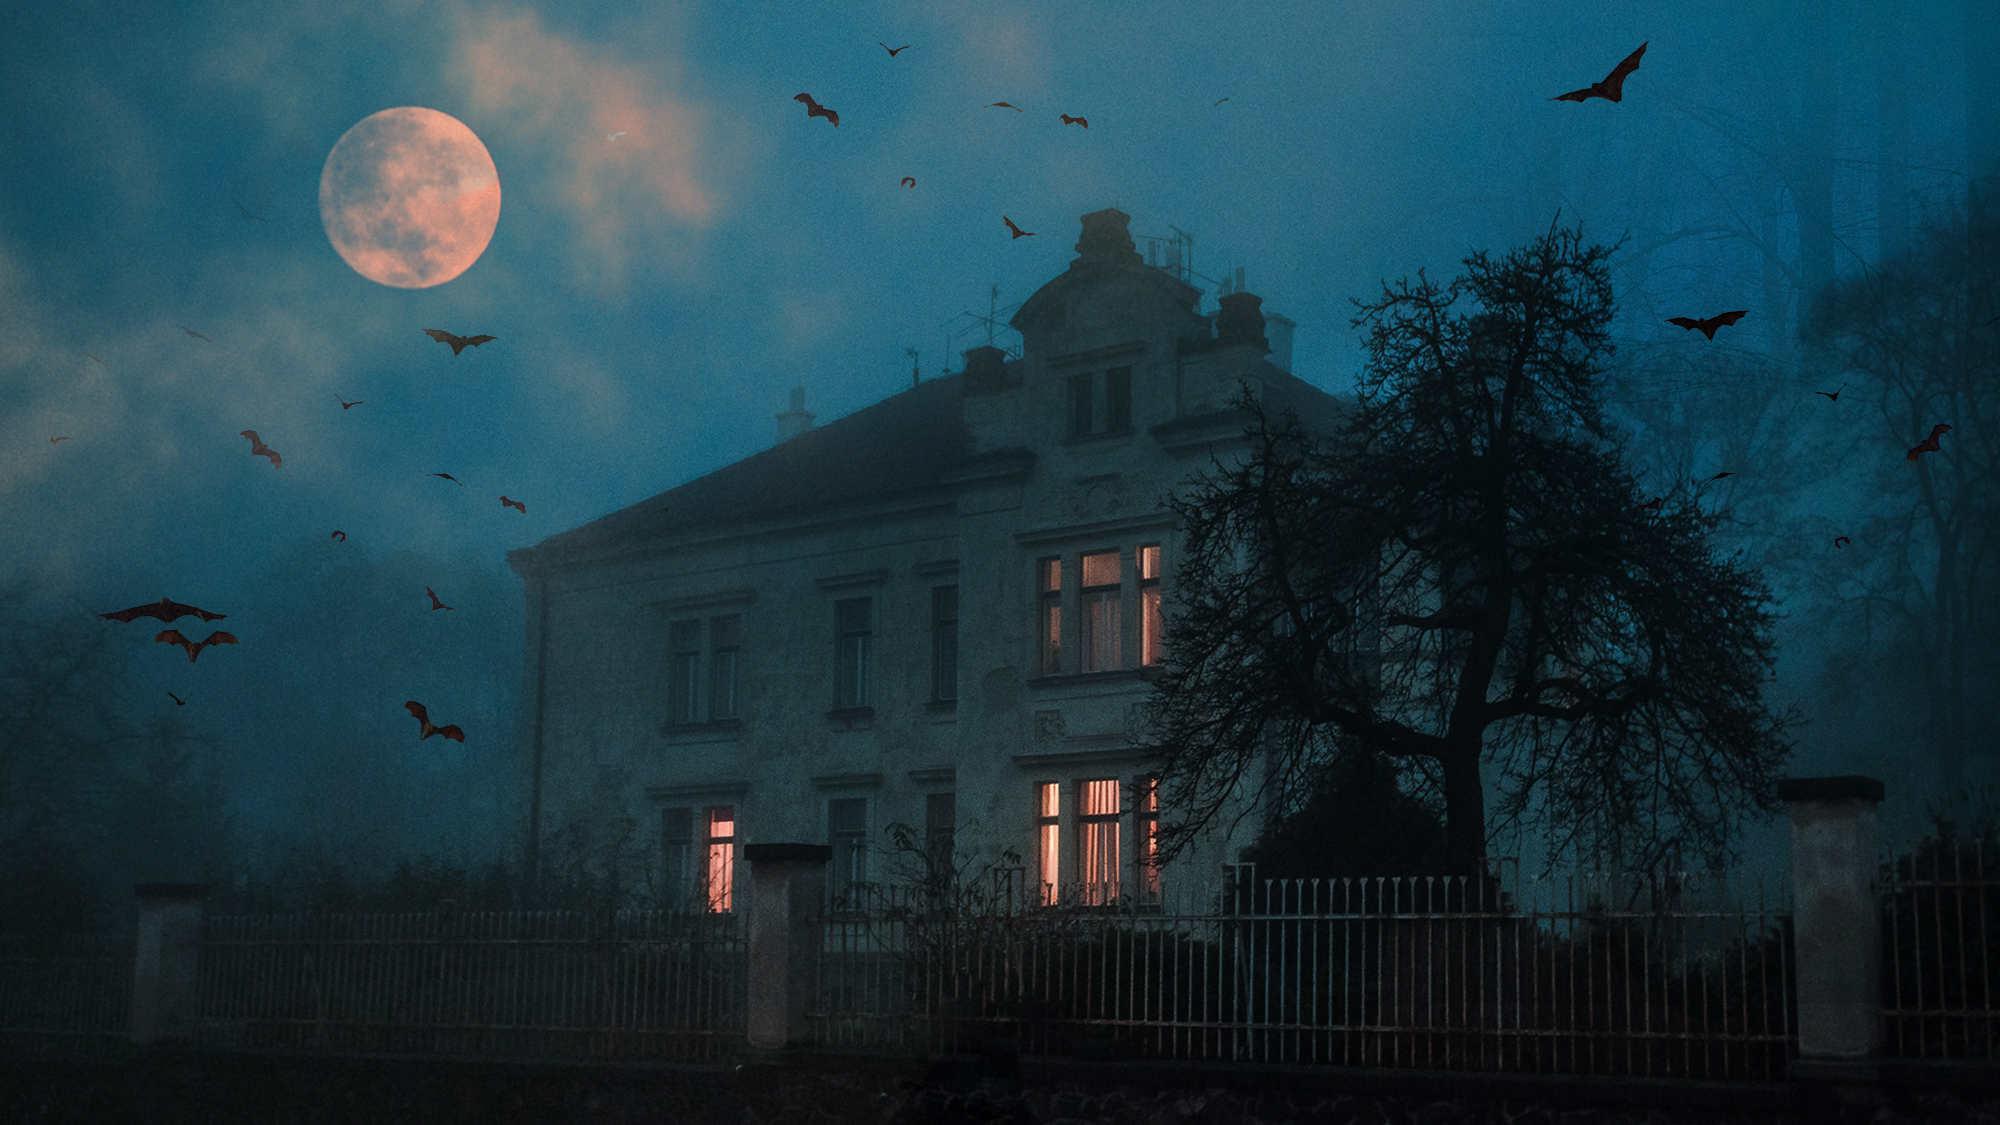 Moon Myths: Why are there so many scary stories about the full moon?